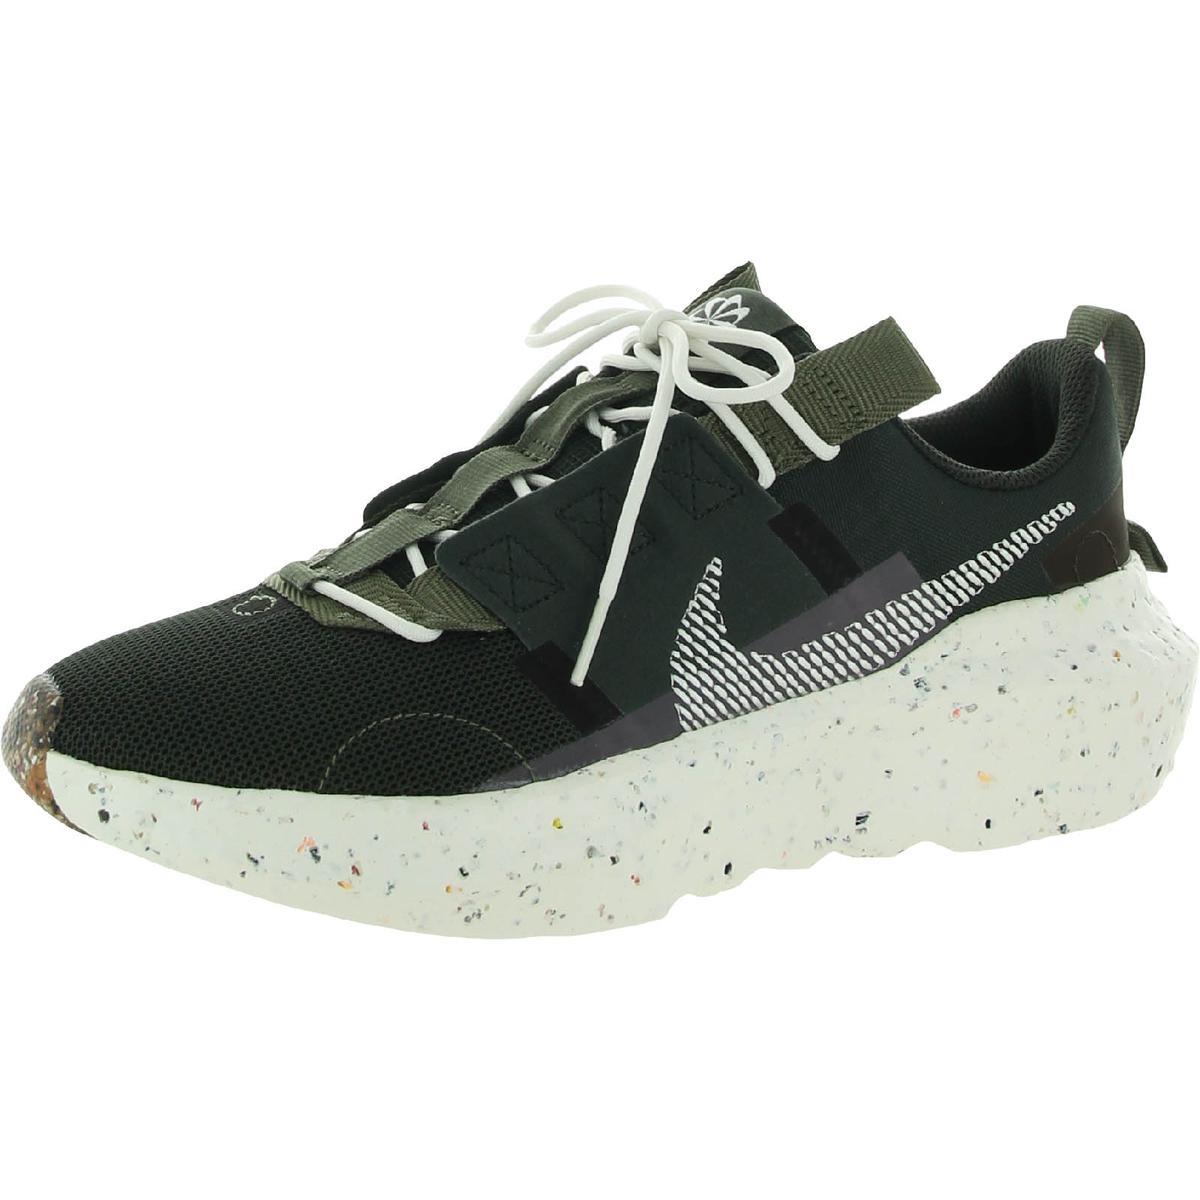 Nike Mens Crater Impact Fitness Workout Running Shoes Sneakers Bhfo 6004 Sequoia/Sail Medium Olive